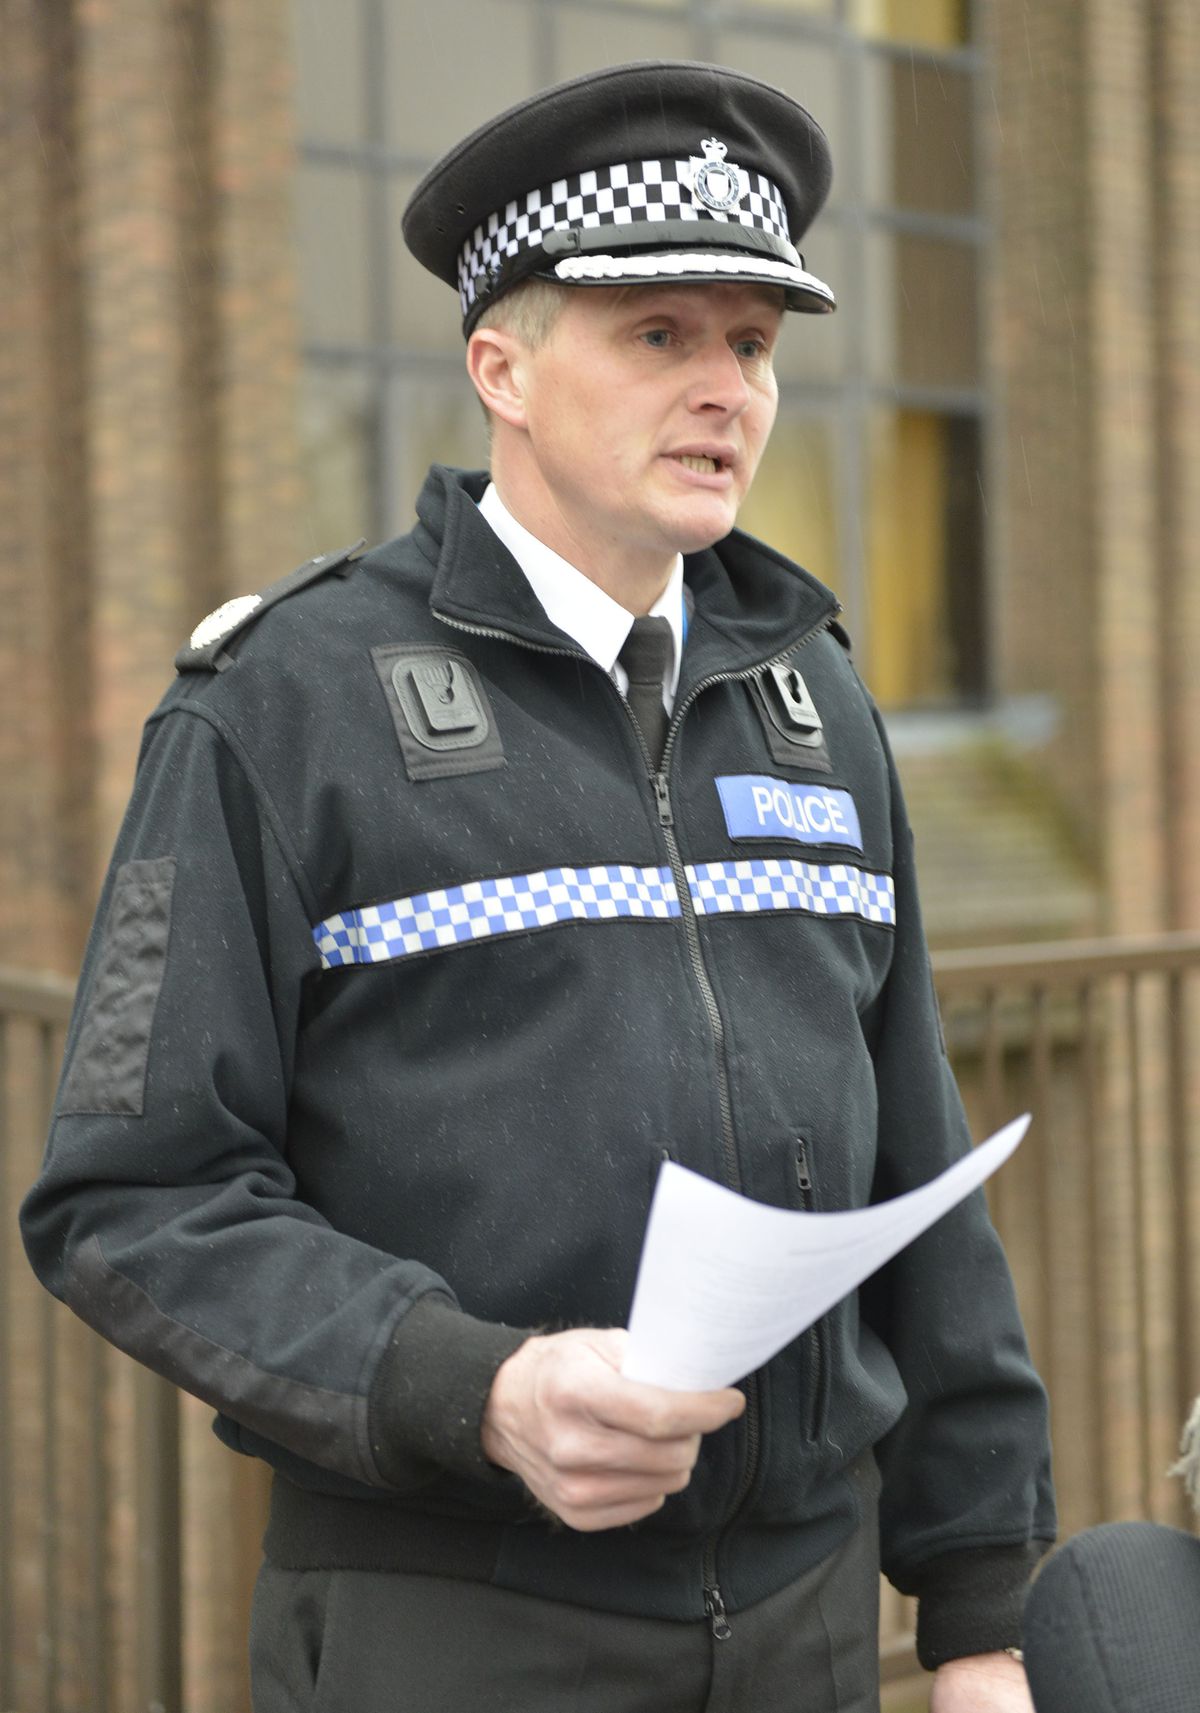 West Mercia Police Chief Hits Out At Simply Not True Claims Regarding